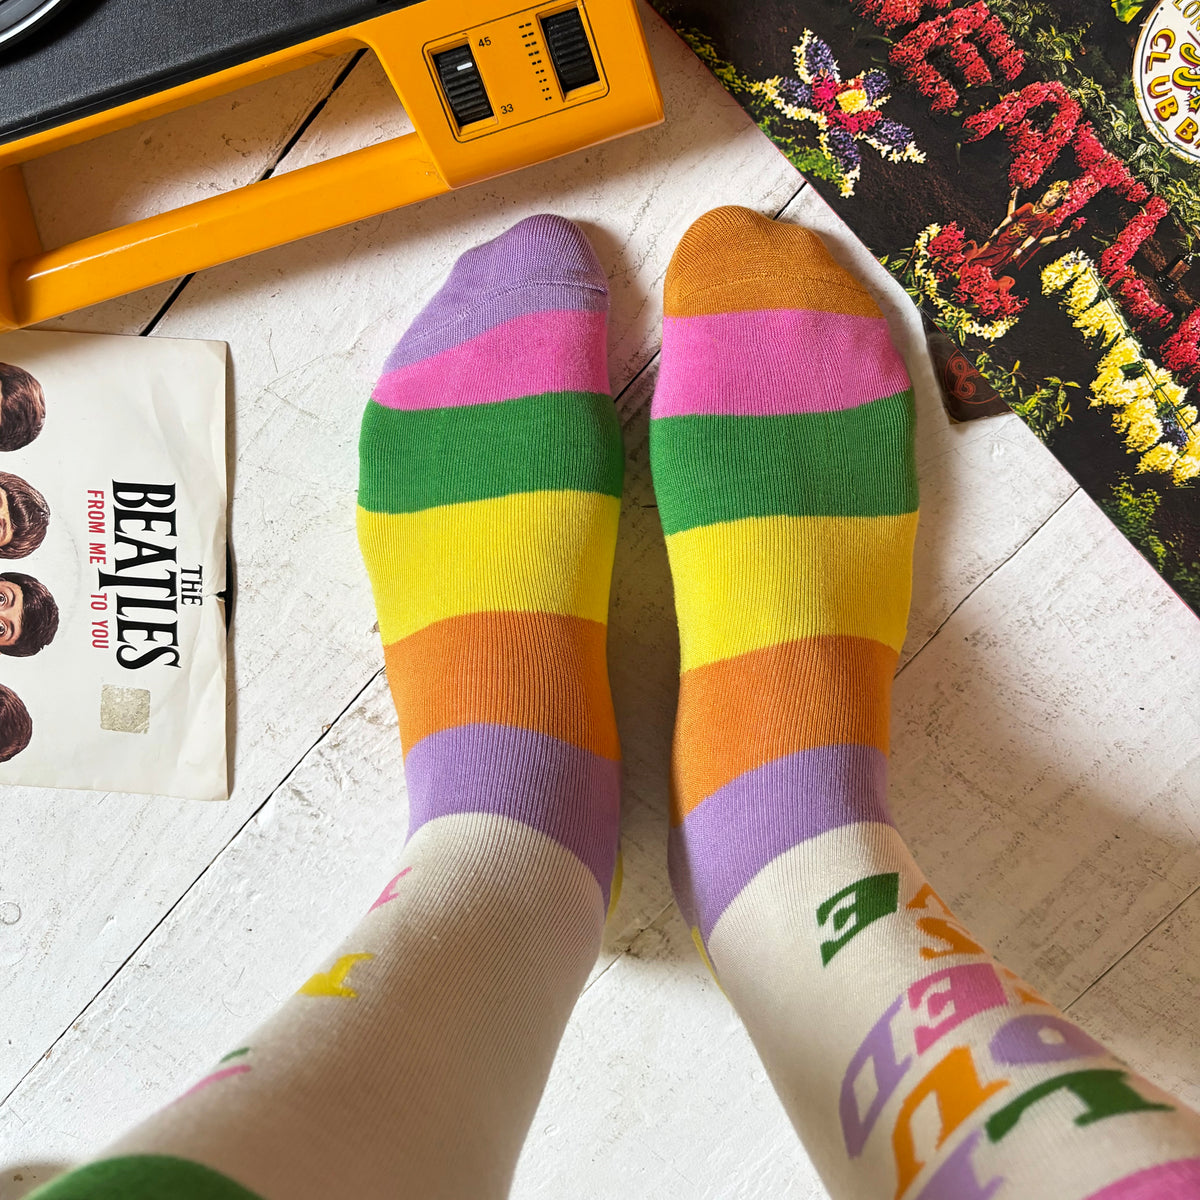 The Beatles All You Need Is Love Socks